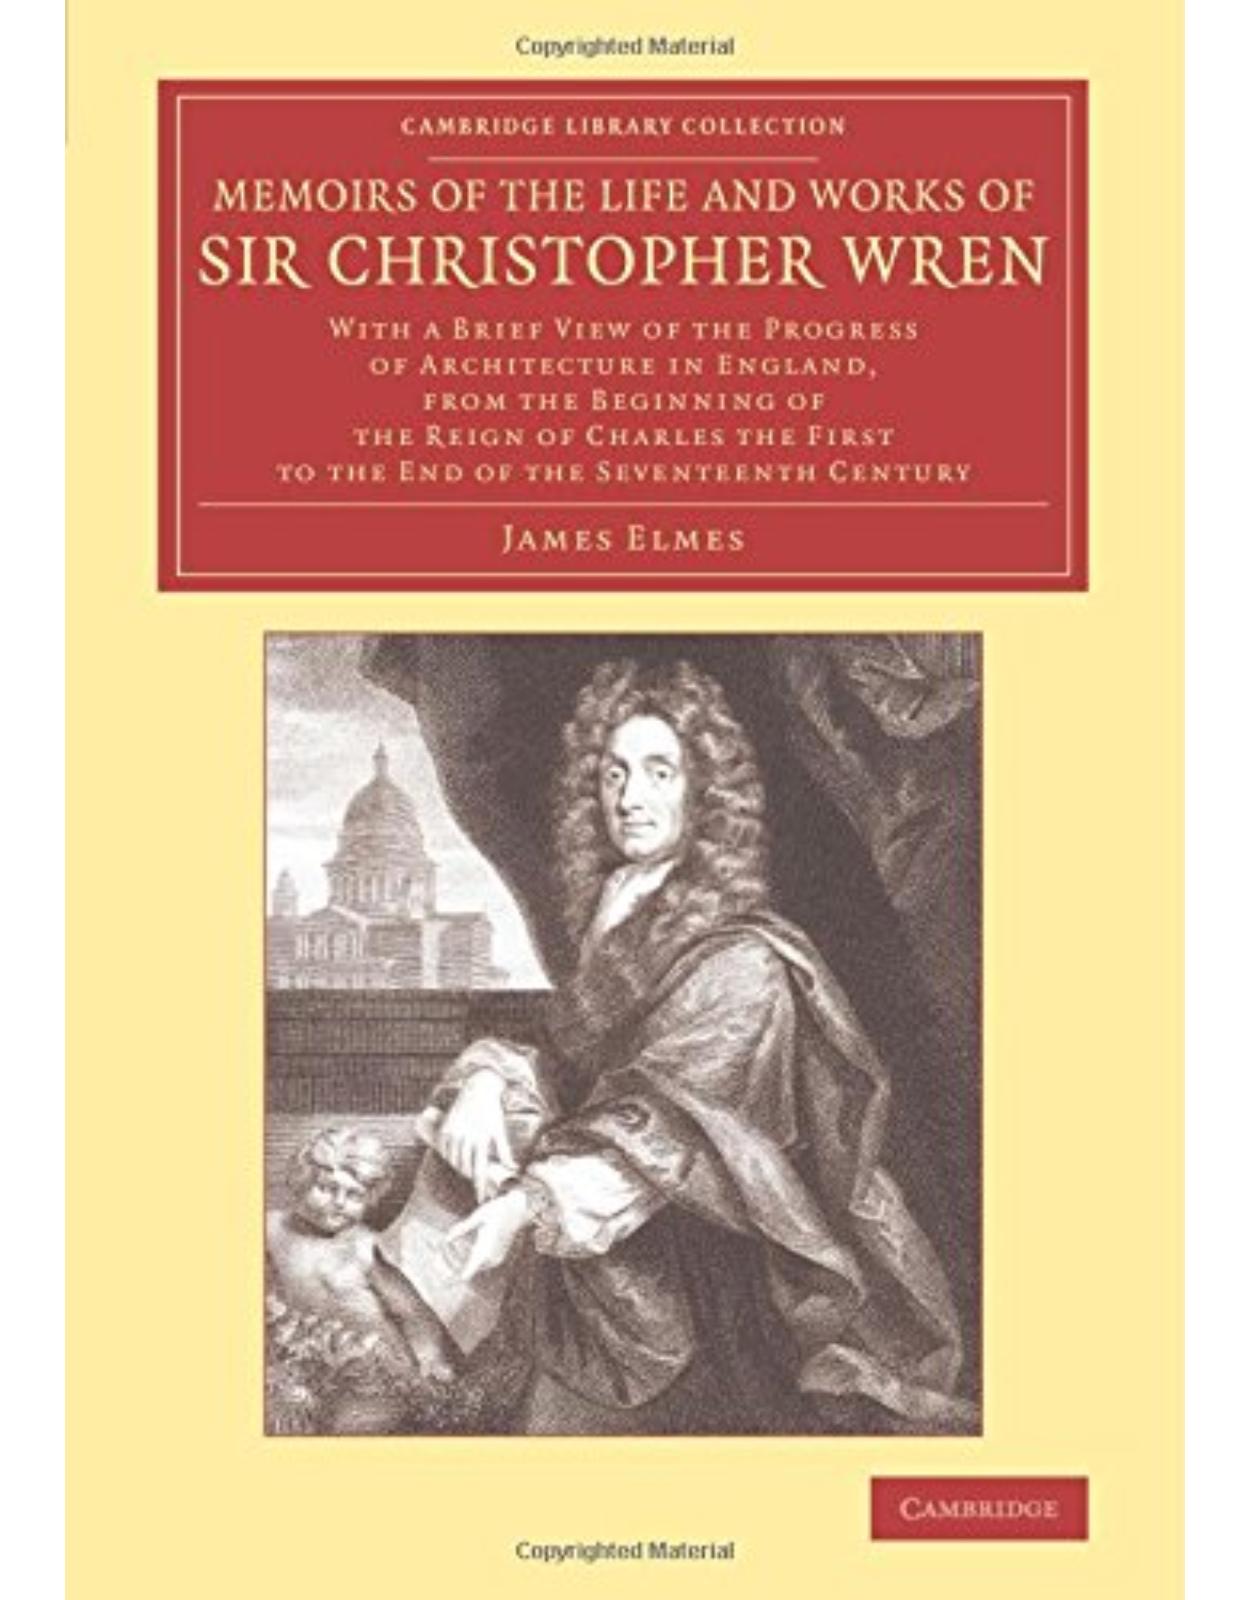 Memoirs of the Life and Works of Sir Christopher Wren: With a Brief View of the Progress of Architecture in England, from the Beginning of the Reign ... Library Collection - Art and Architecture)